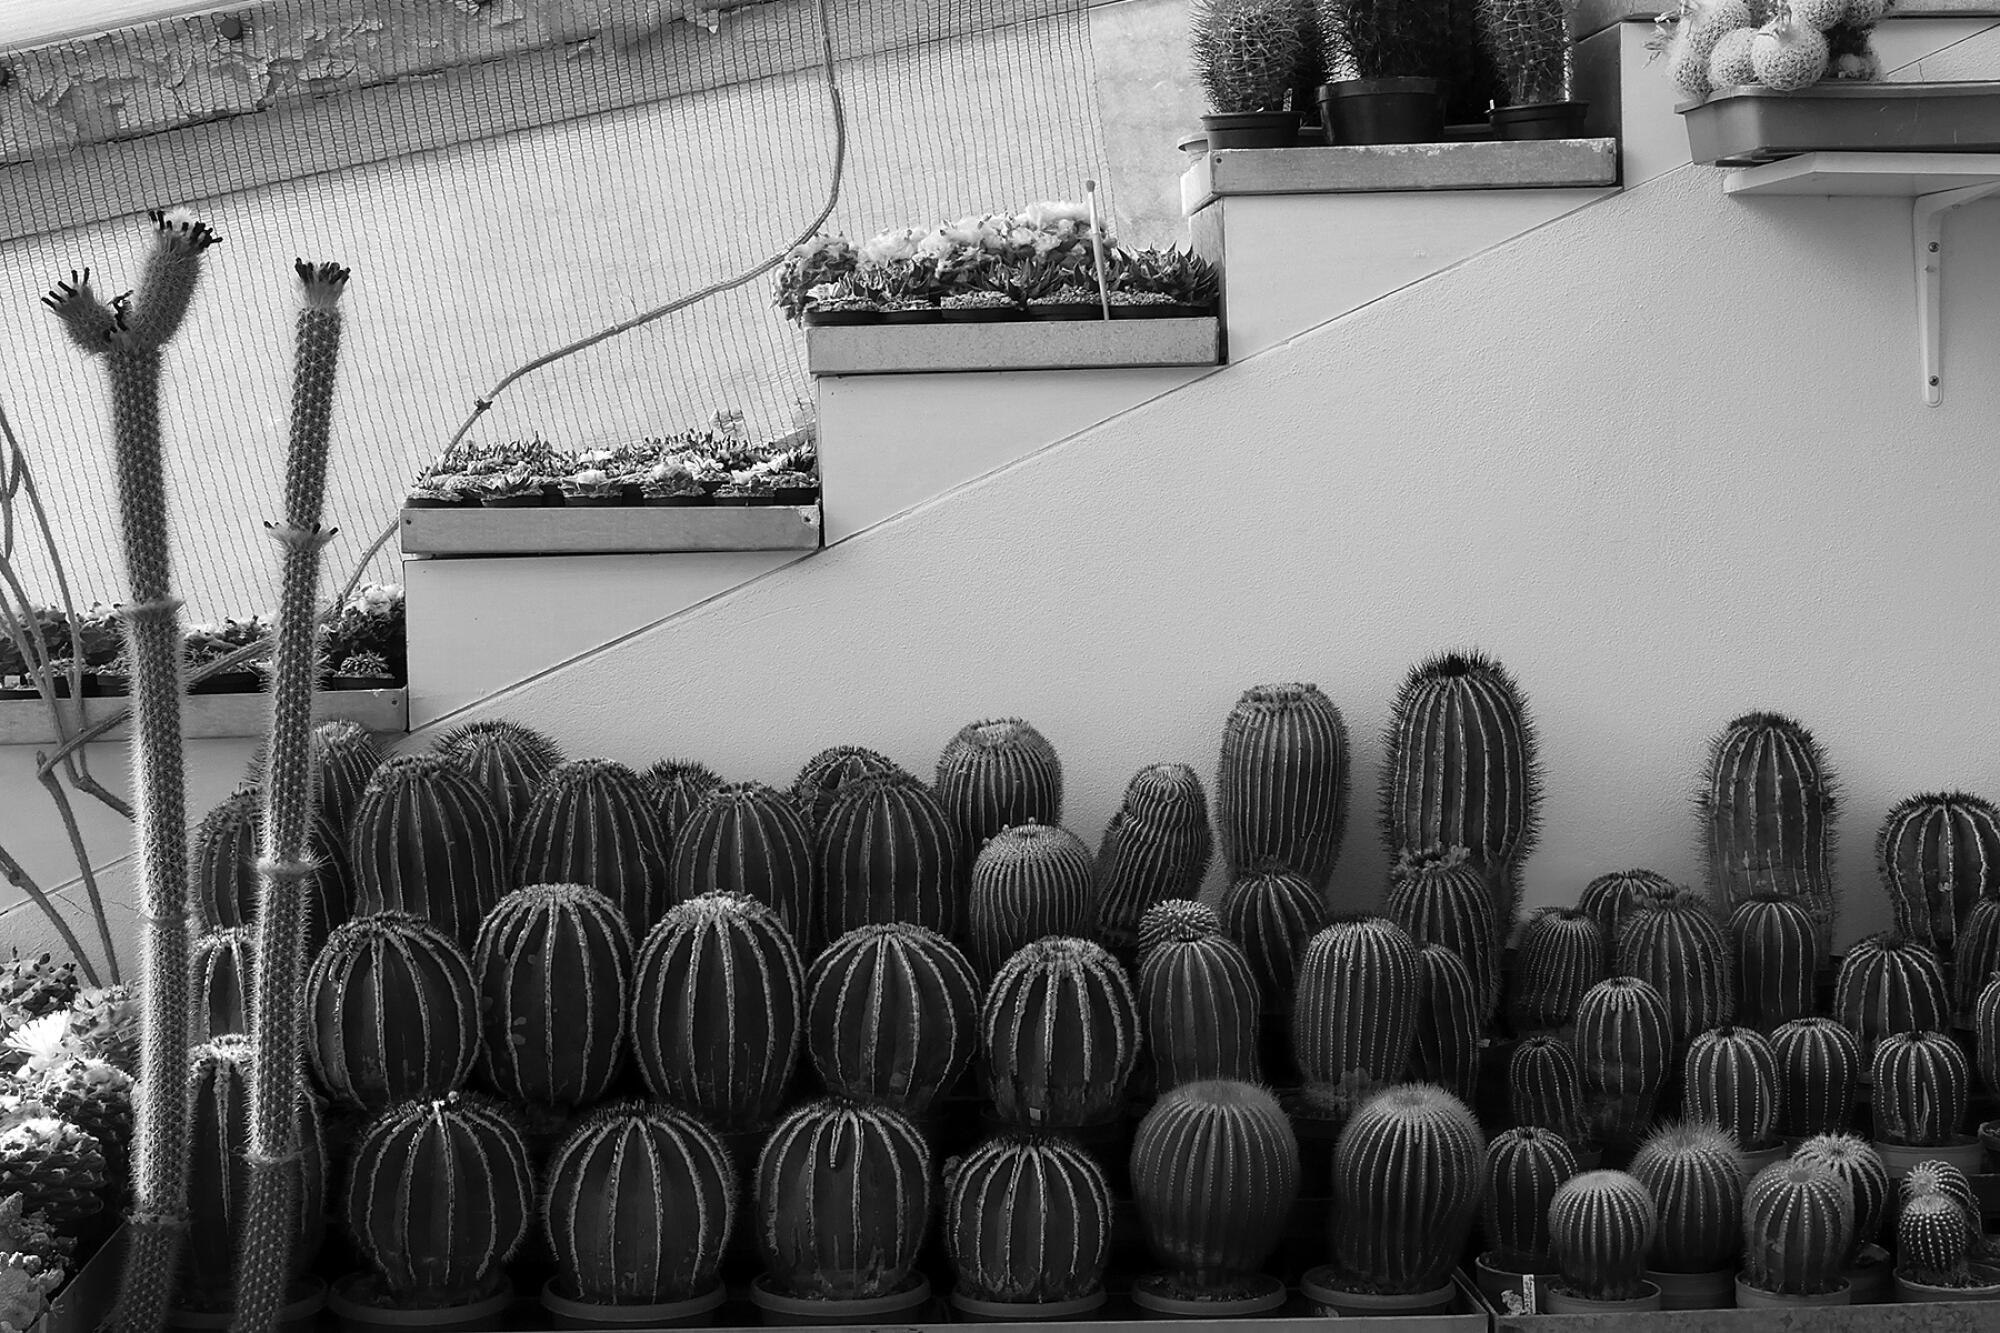 A collection of cacti  lines a wall and stairs in a black and white photo